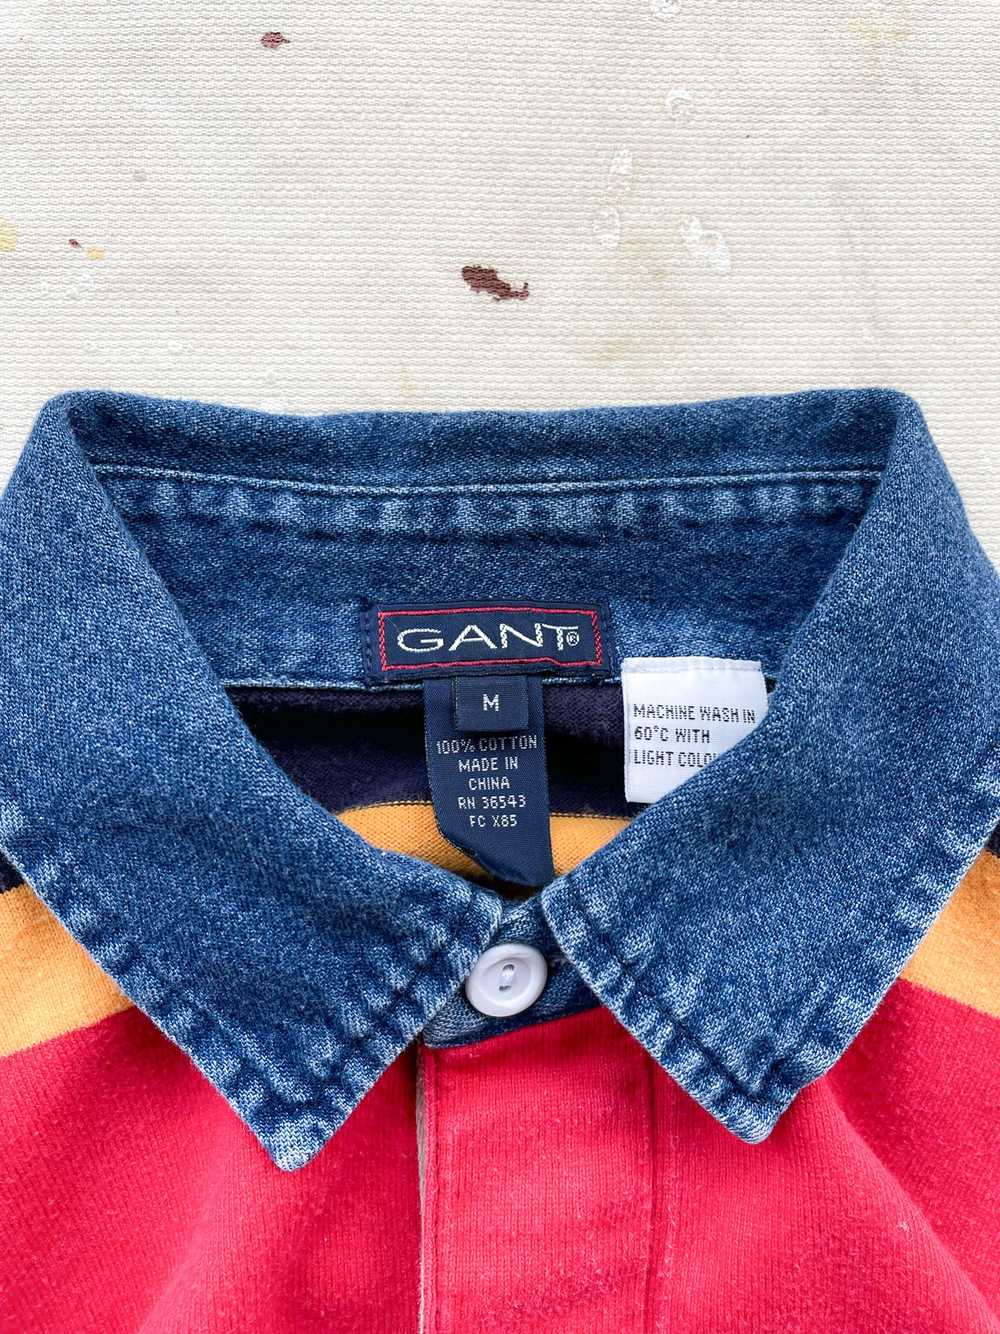 90's Gant Rugby Shirt—[M] - image 3